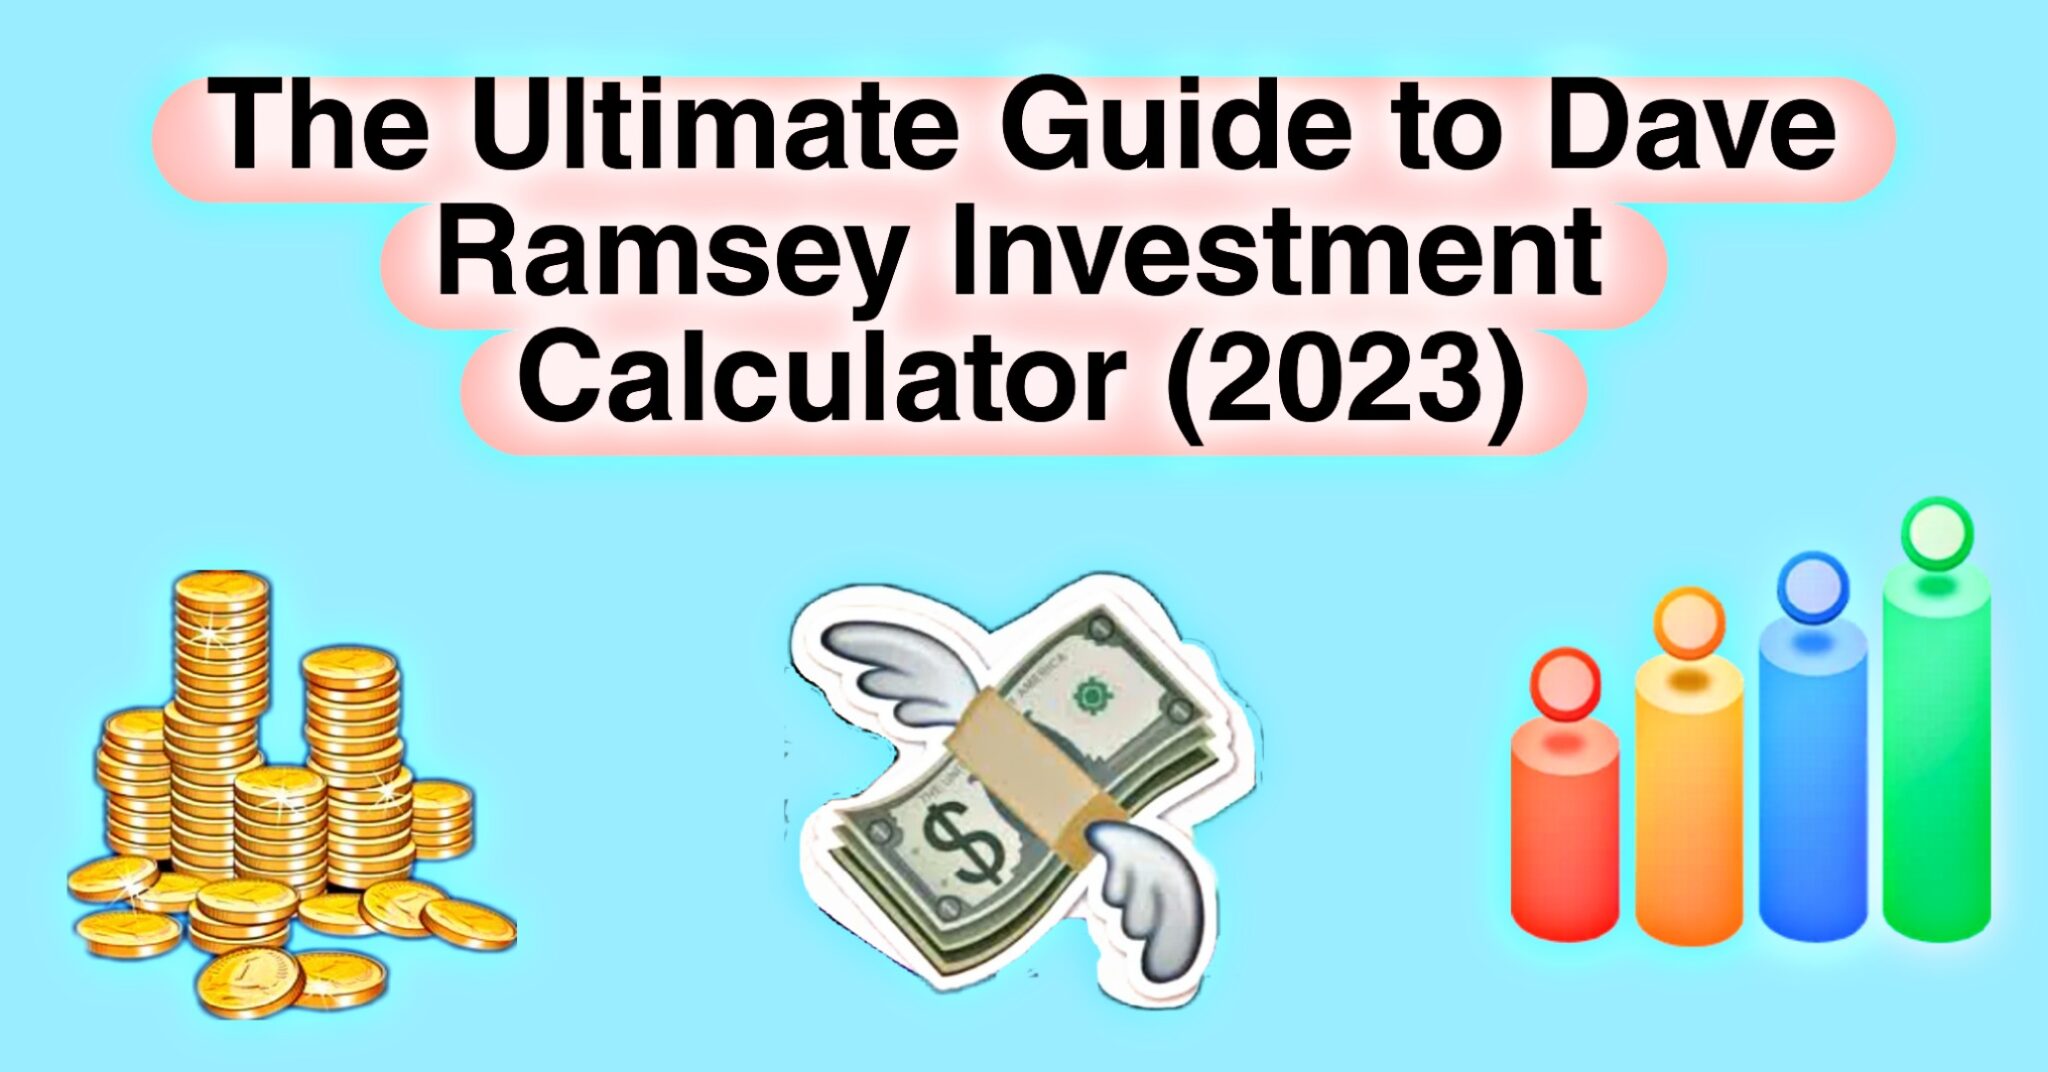 The Ultimate Guide to Dave Ramsey Investment Calculator (2023